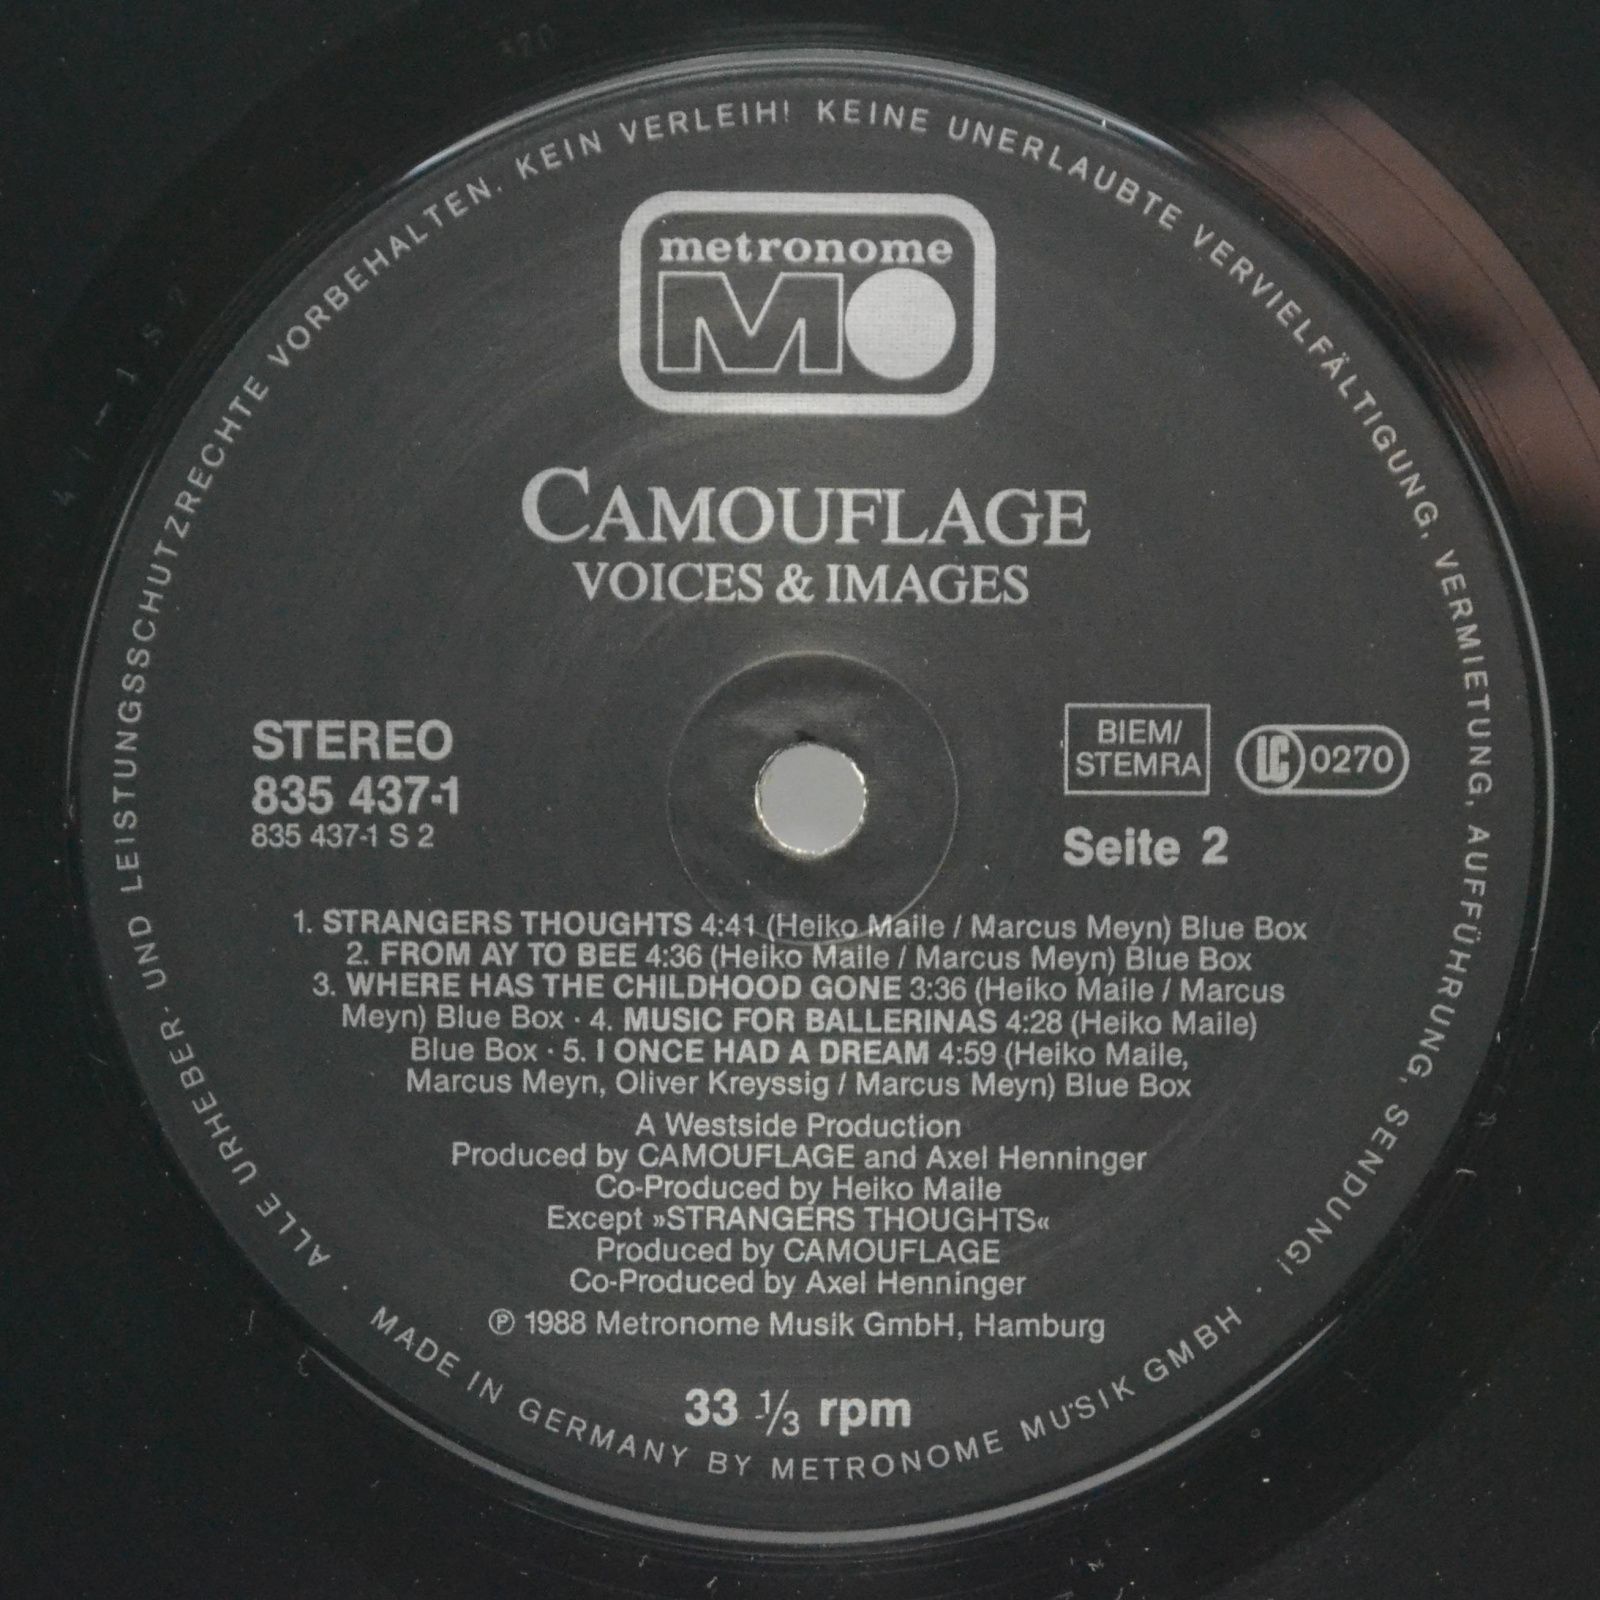 Camouflage — Voices & Images, 1988